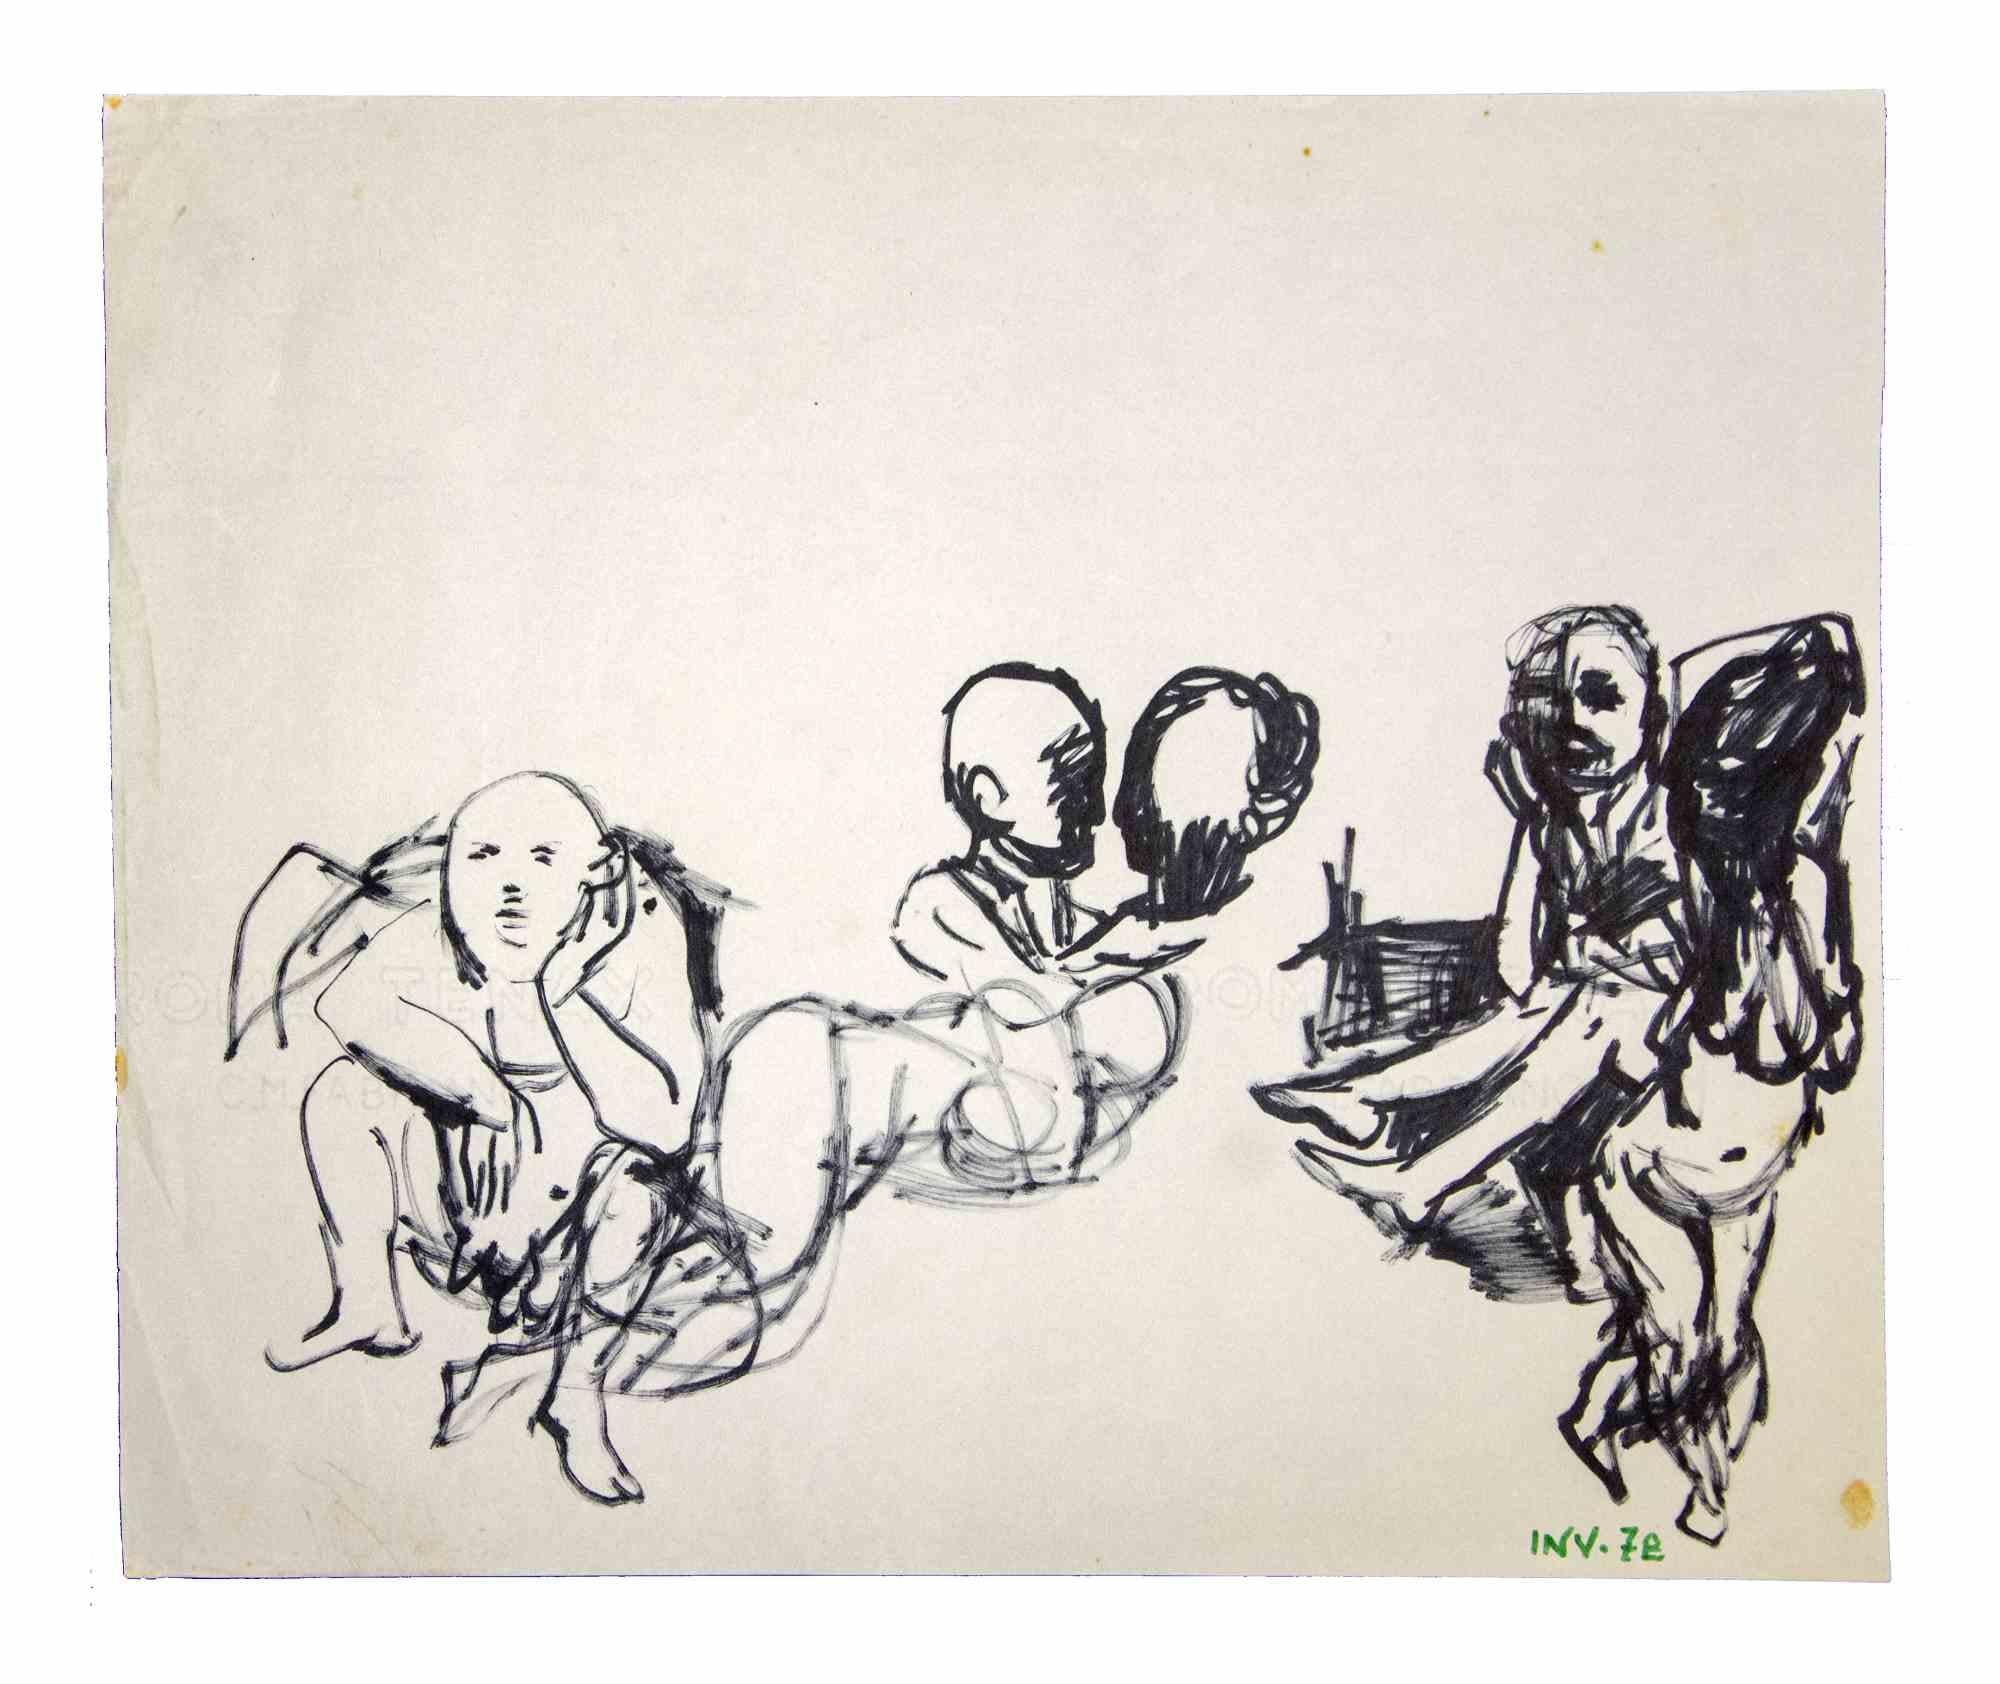 Posing  Figures Sketch - Drawing by Leo Guida - 1970s